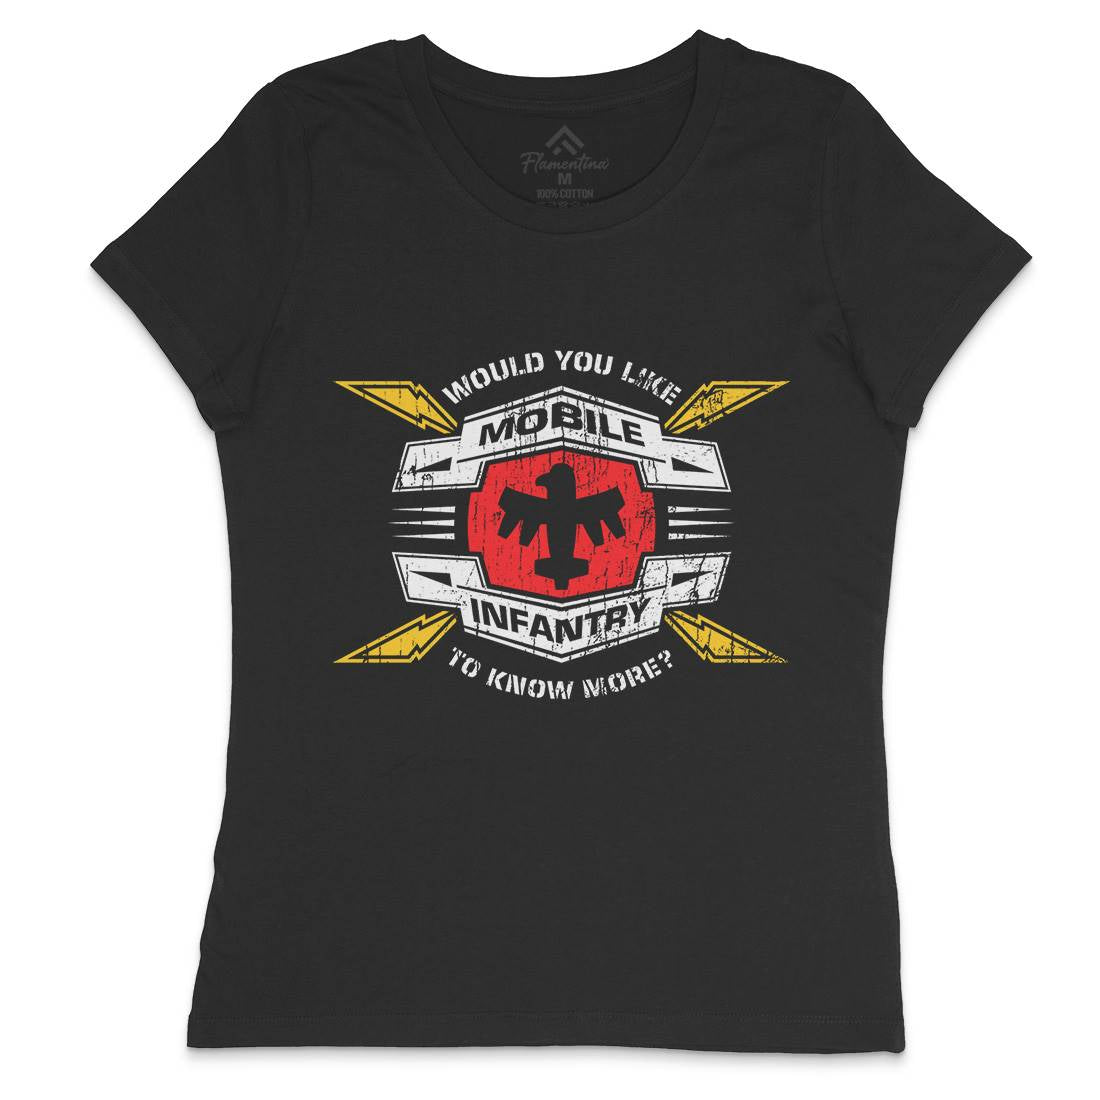 Mobile Infantry Womens Crew Neck T-Shirt Army D270